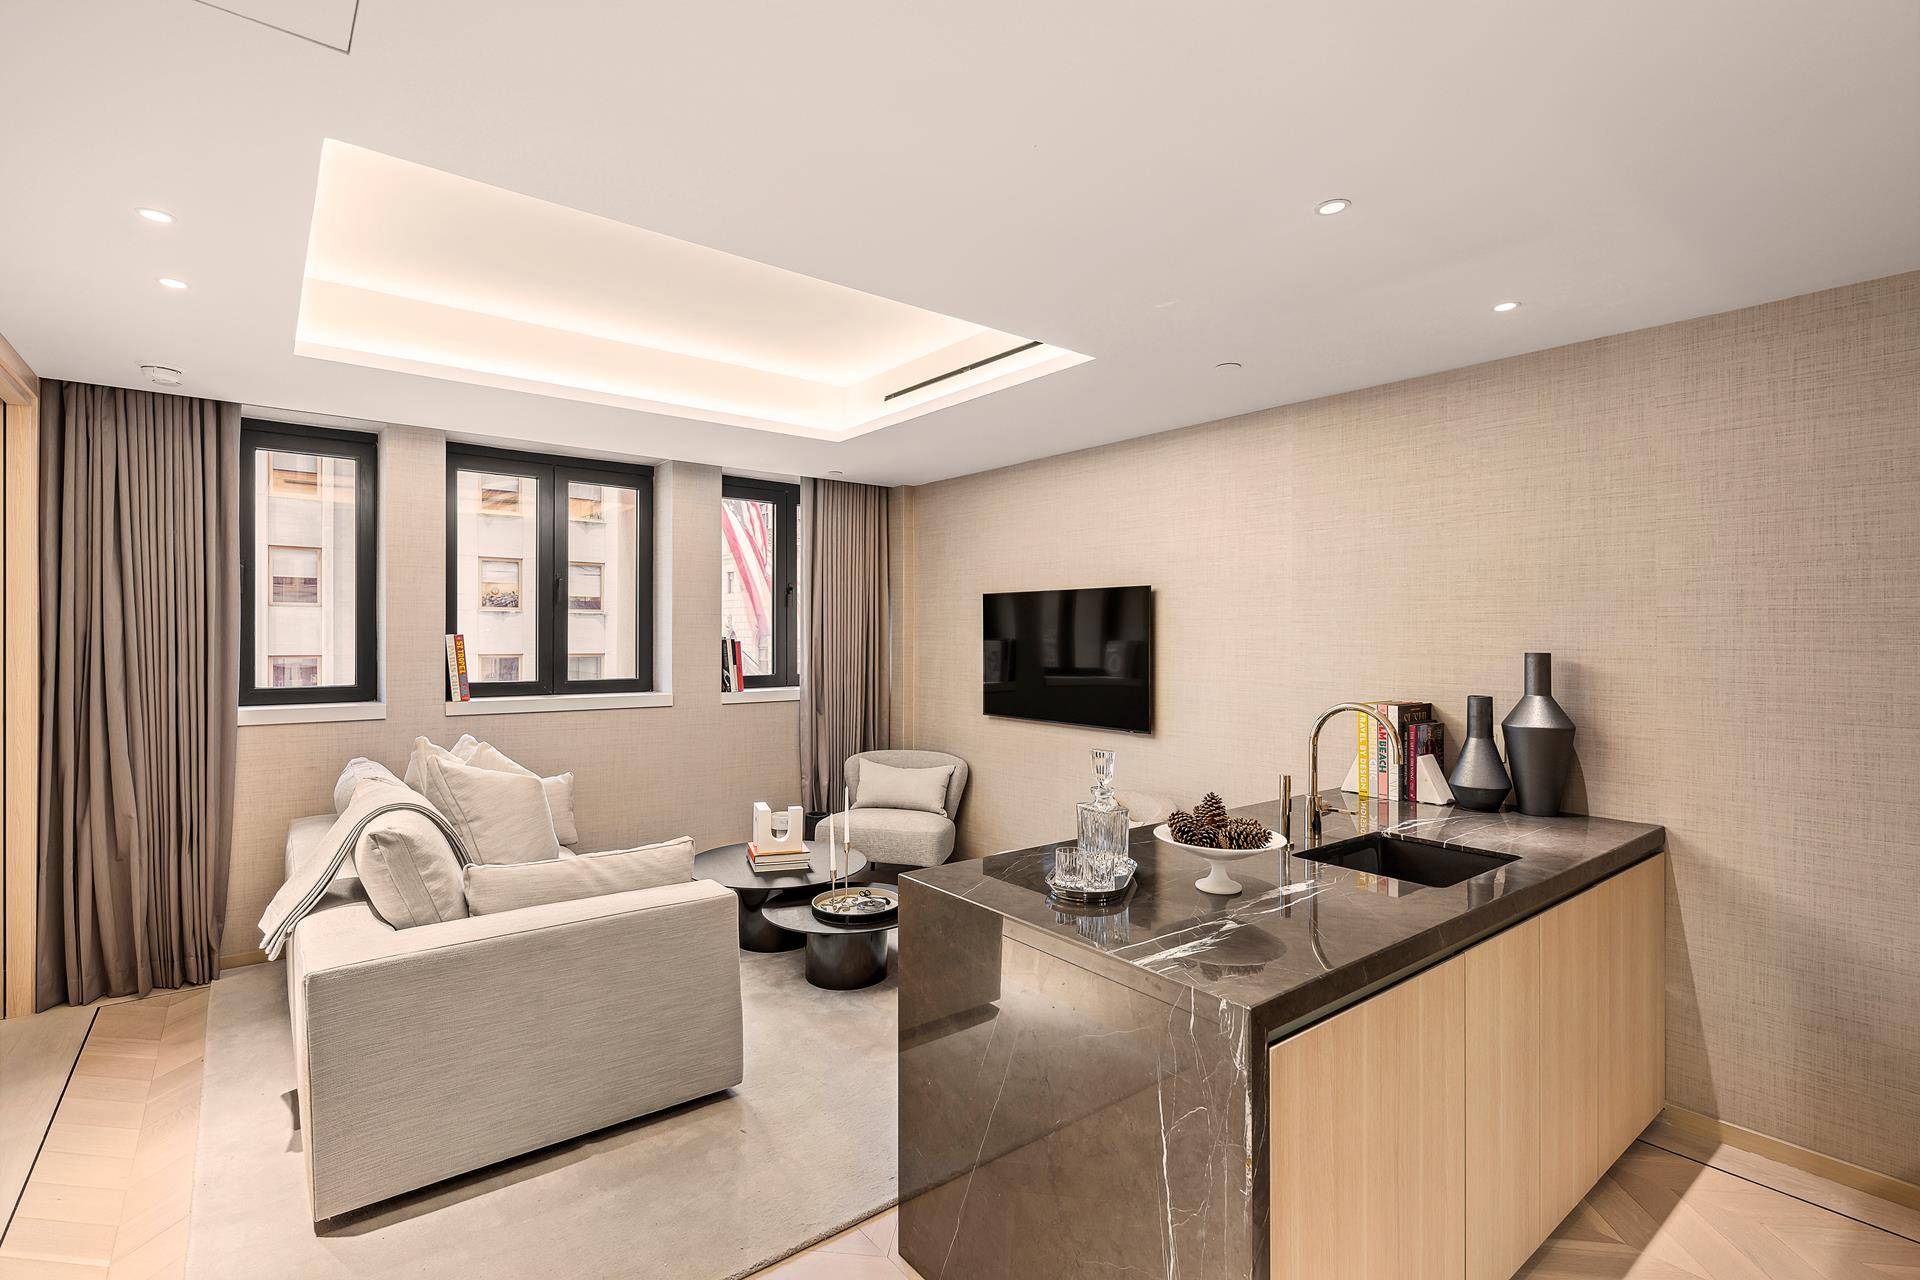 ELEVATE YOUR LIVING EXPERIENCE ON FIFTH AVENUE SOPHISTICATED, LUXURIOUS AND EXCLUSIVE FULLY FURNISHED AND EXPERTLY APPOINTED 1 BEDROOM WITH SPA STYLE BATHROOMWORLD CLASS SERVICE amp ; AMENITIES ENJOY CENTRAL PARK, ...